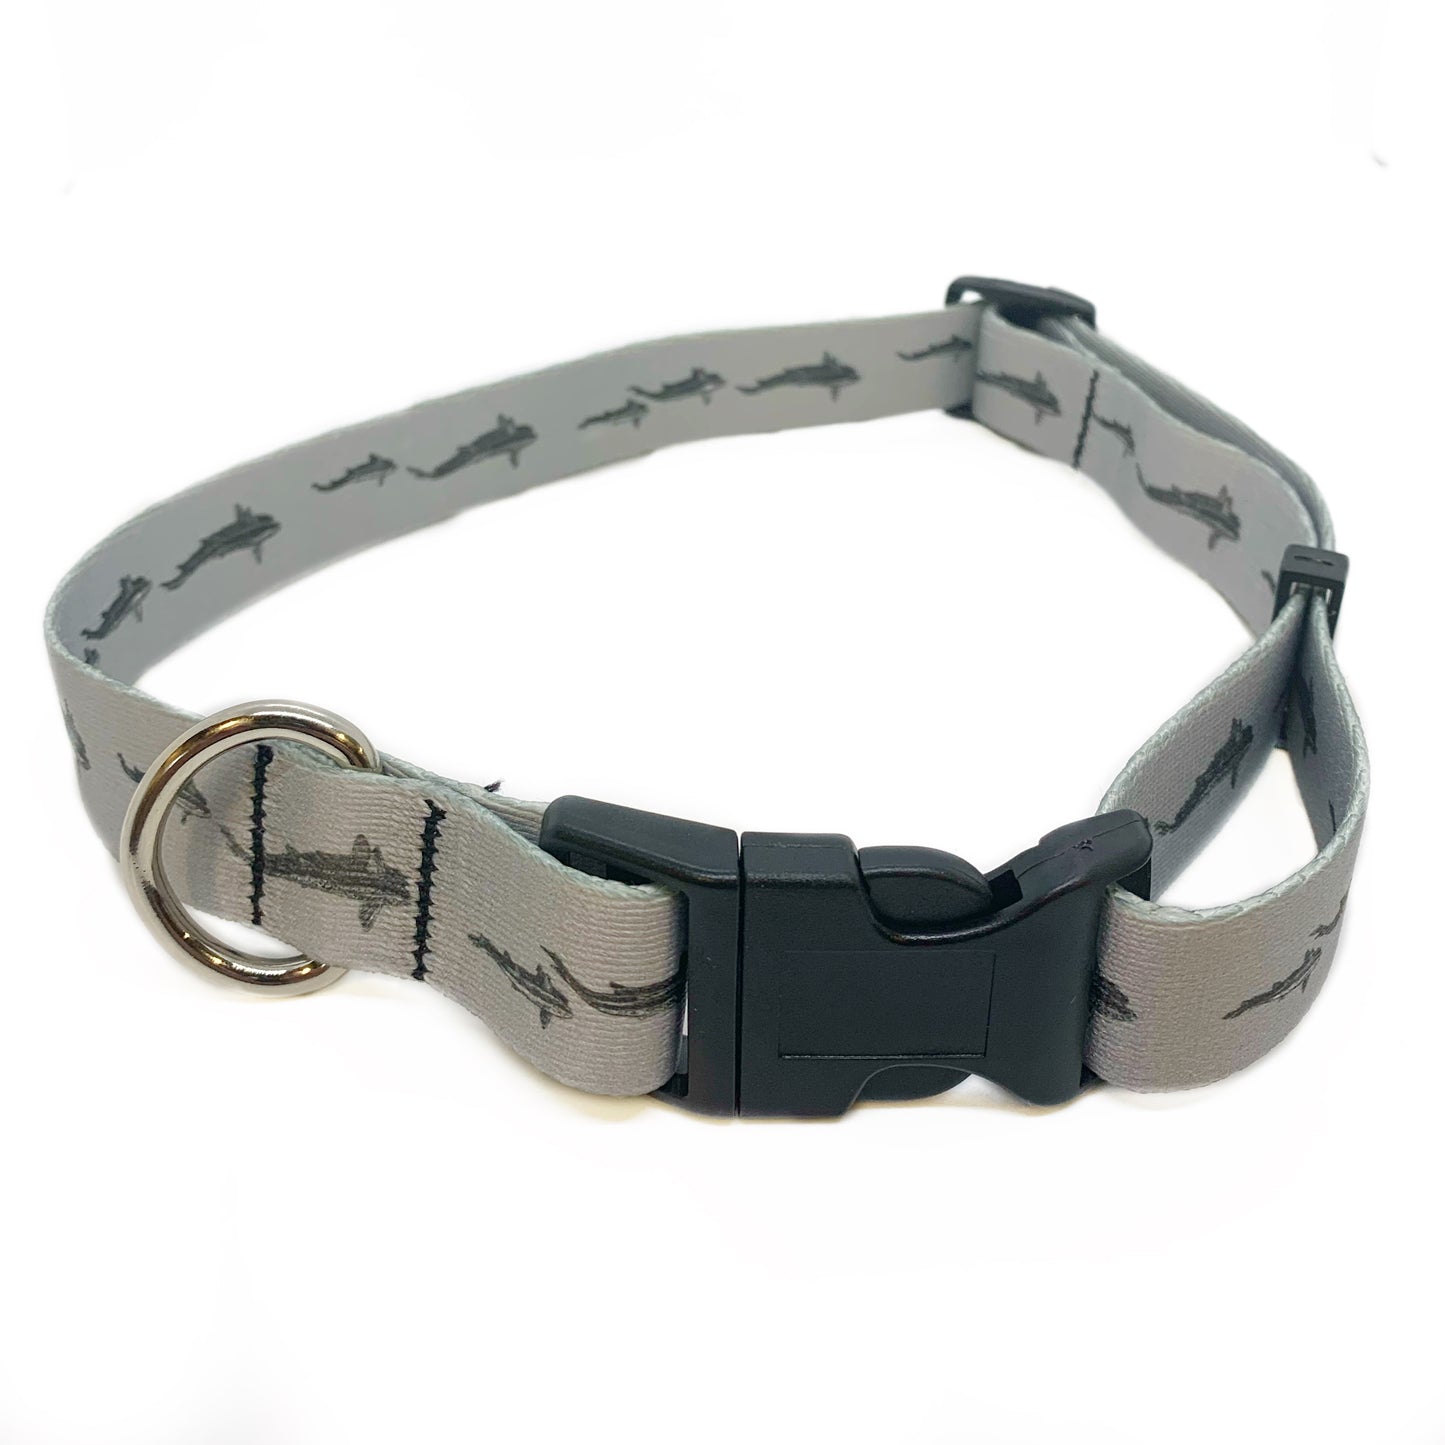 A gray nylon dog collar is shown. Trout swimming from above is printed on it.